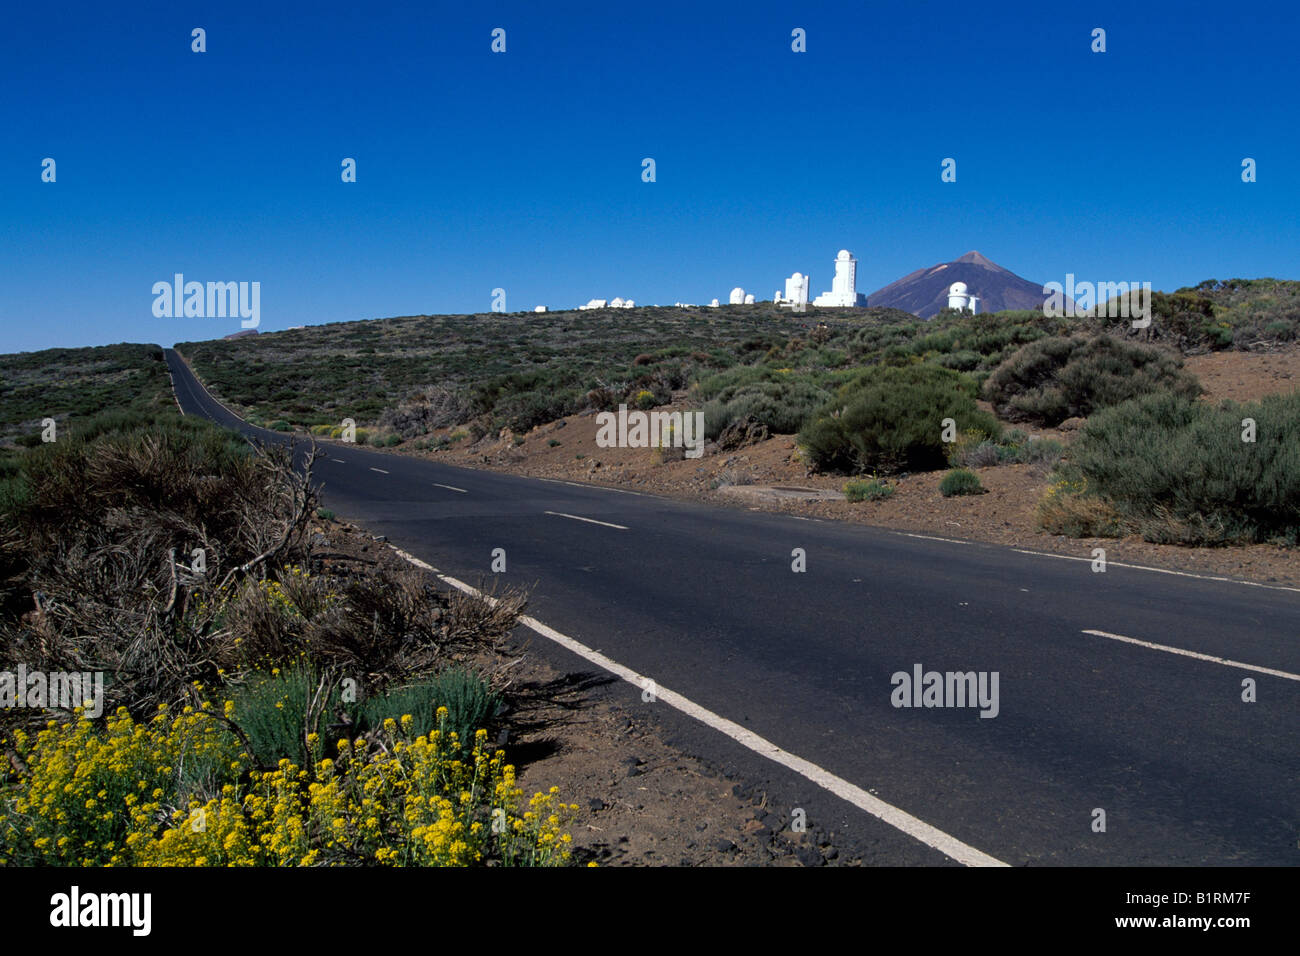 Observatory, Teid Mouhntains, Tenerife, Canary Islands, Spain Stock Photo